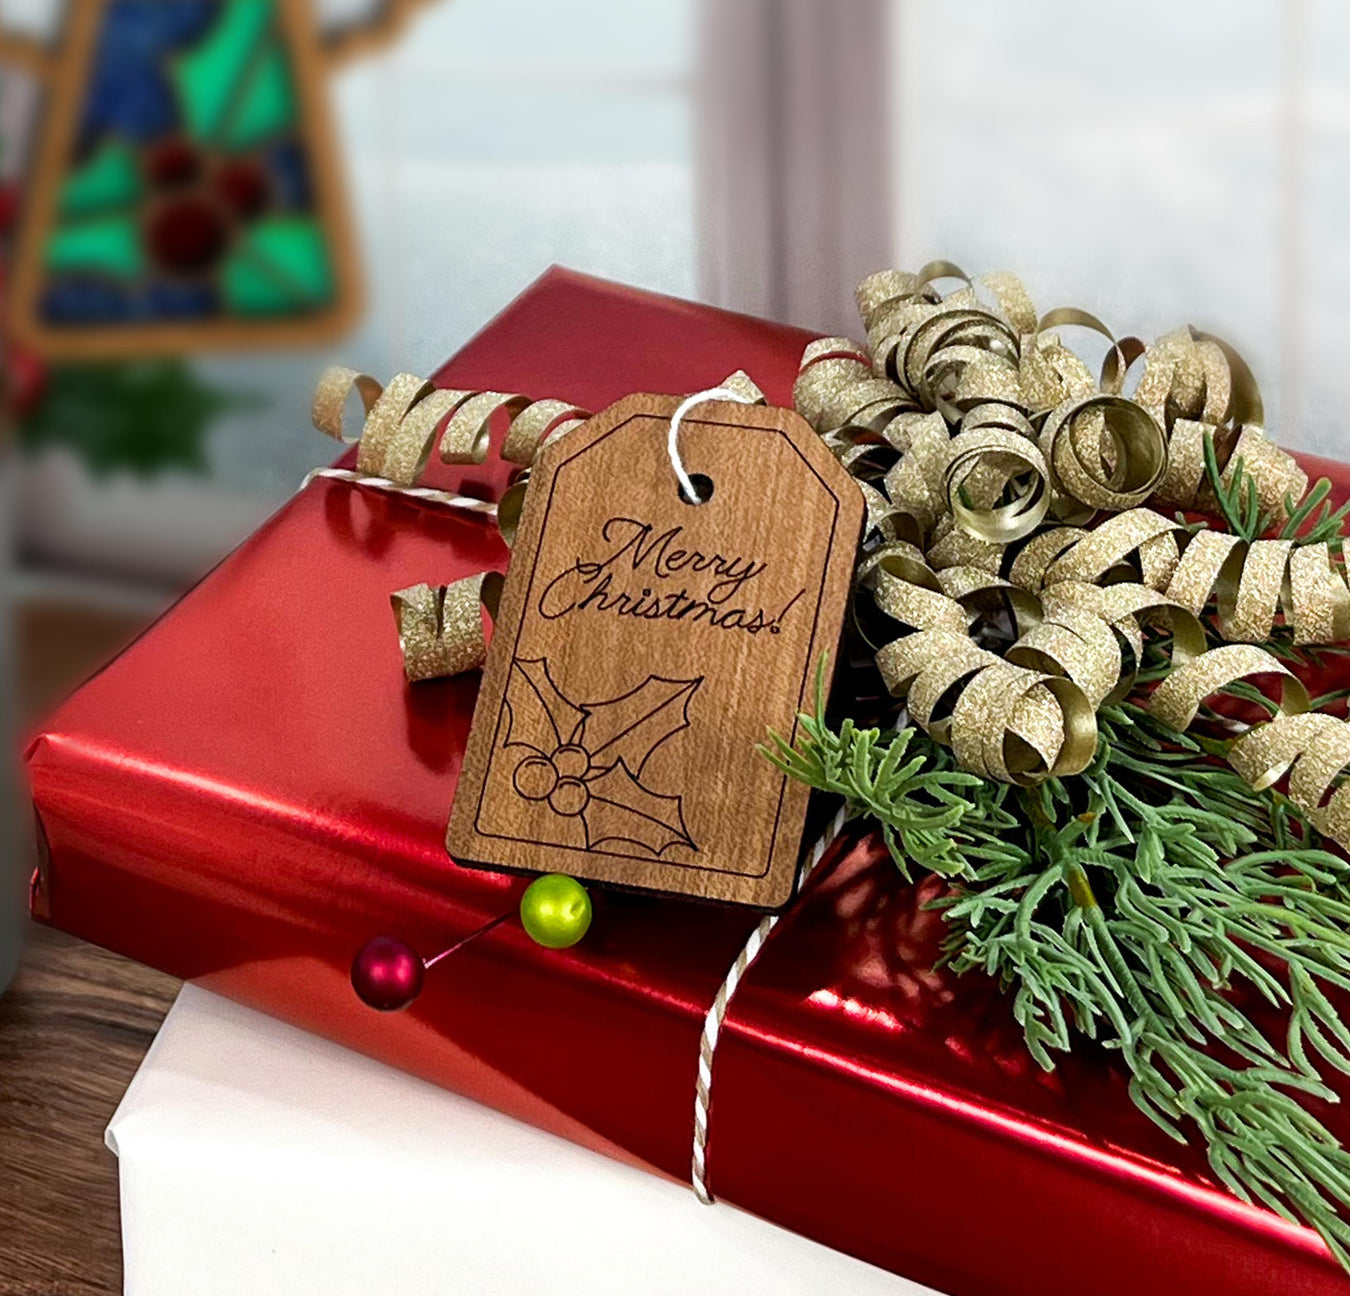 A festive Christmas present wrapped in red paper with a handcrafted Forged Flare® tag reading "Merry Christmas", accompanied by golden ribbons and greenery, ready to be adorned with Christmas angel ornaments.